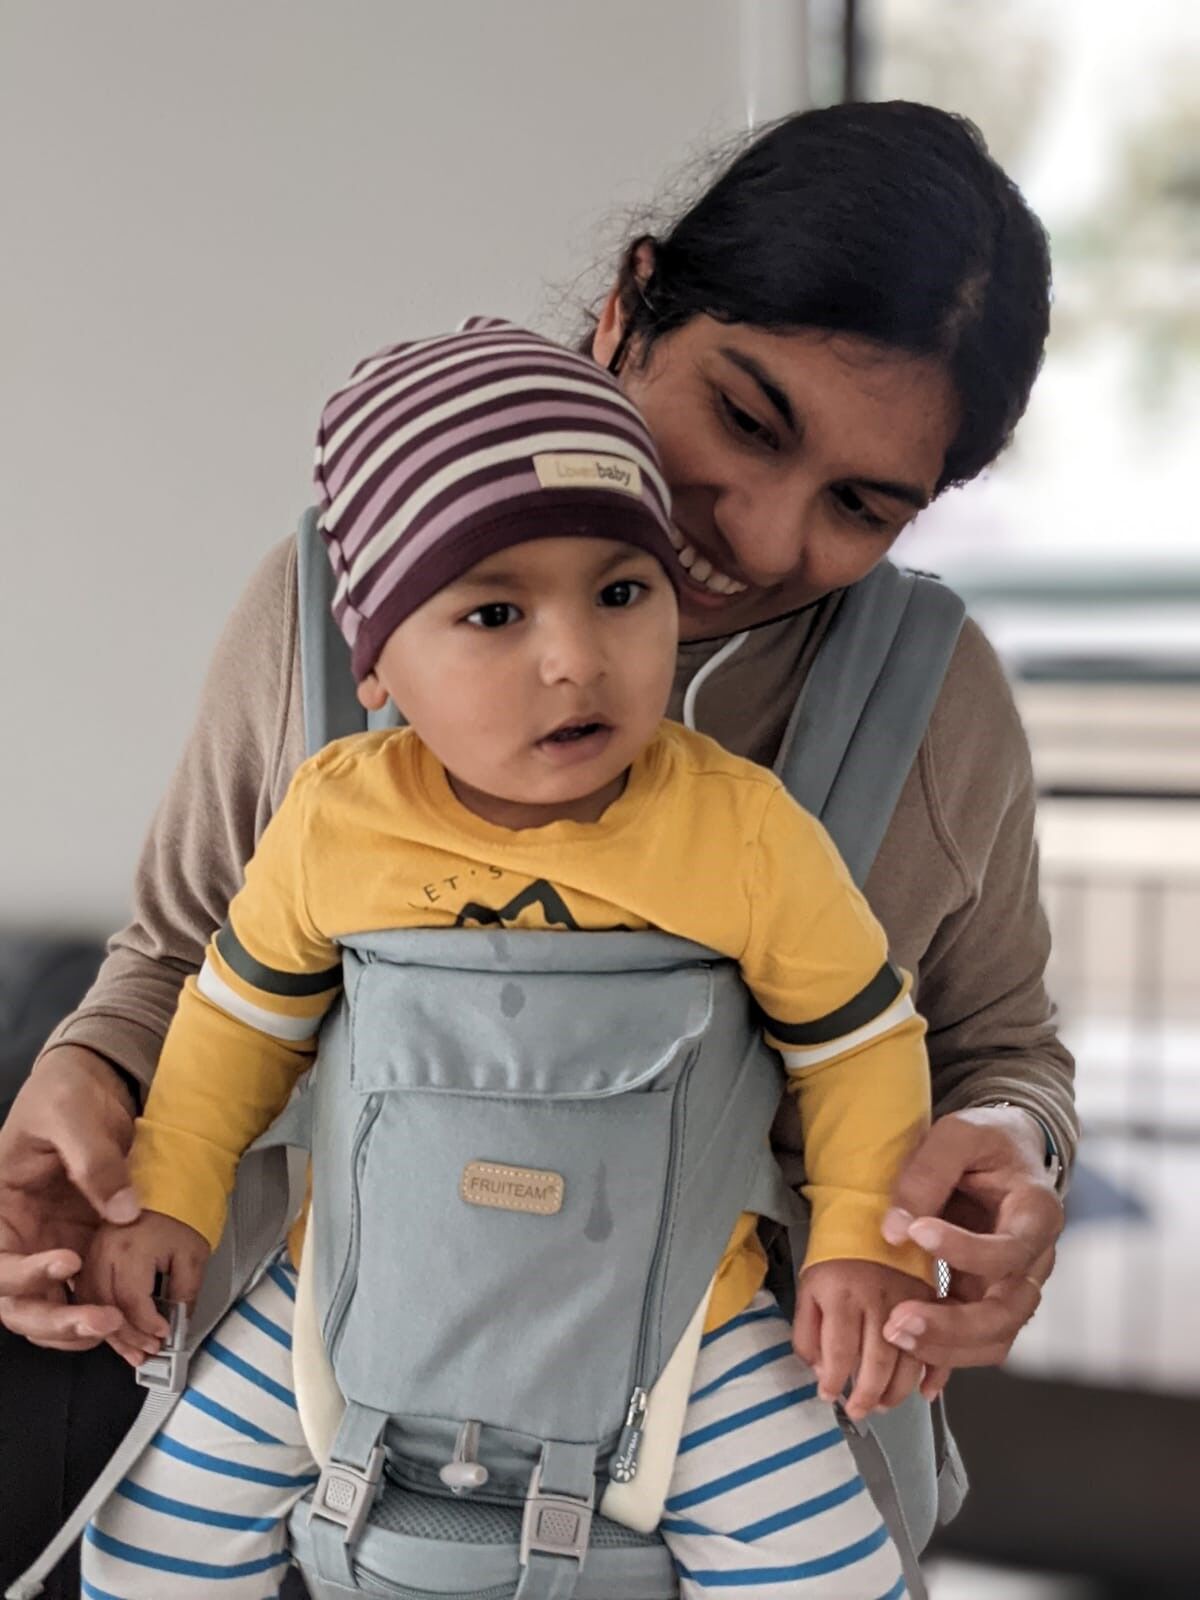 Swati Tyagi, 34, pictured with her son, Miransh, was a postdoctoral researcher at the Salk Institute for Biological Studies.